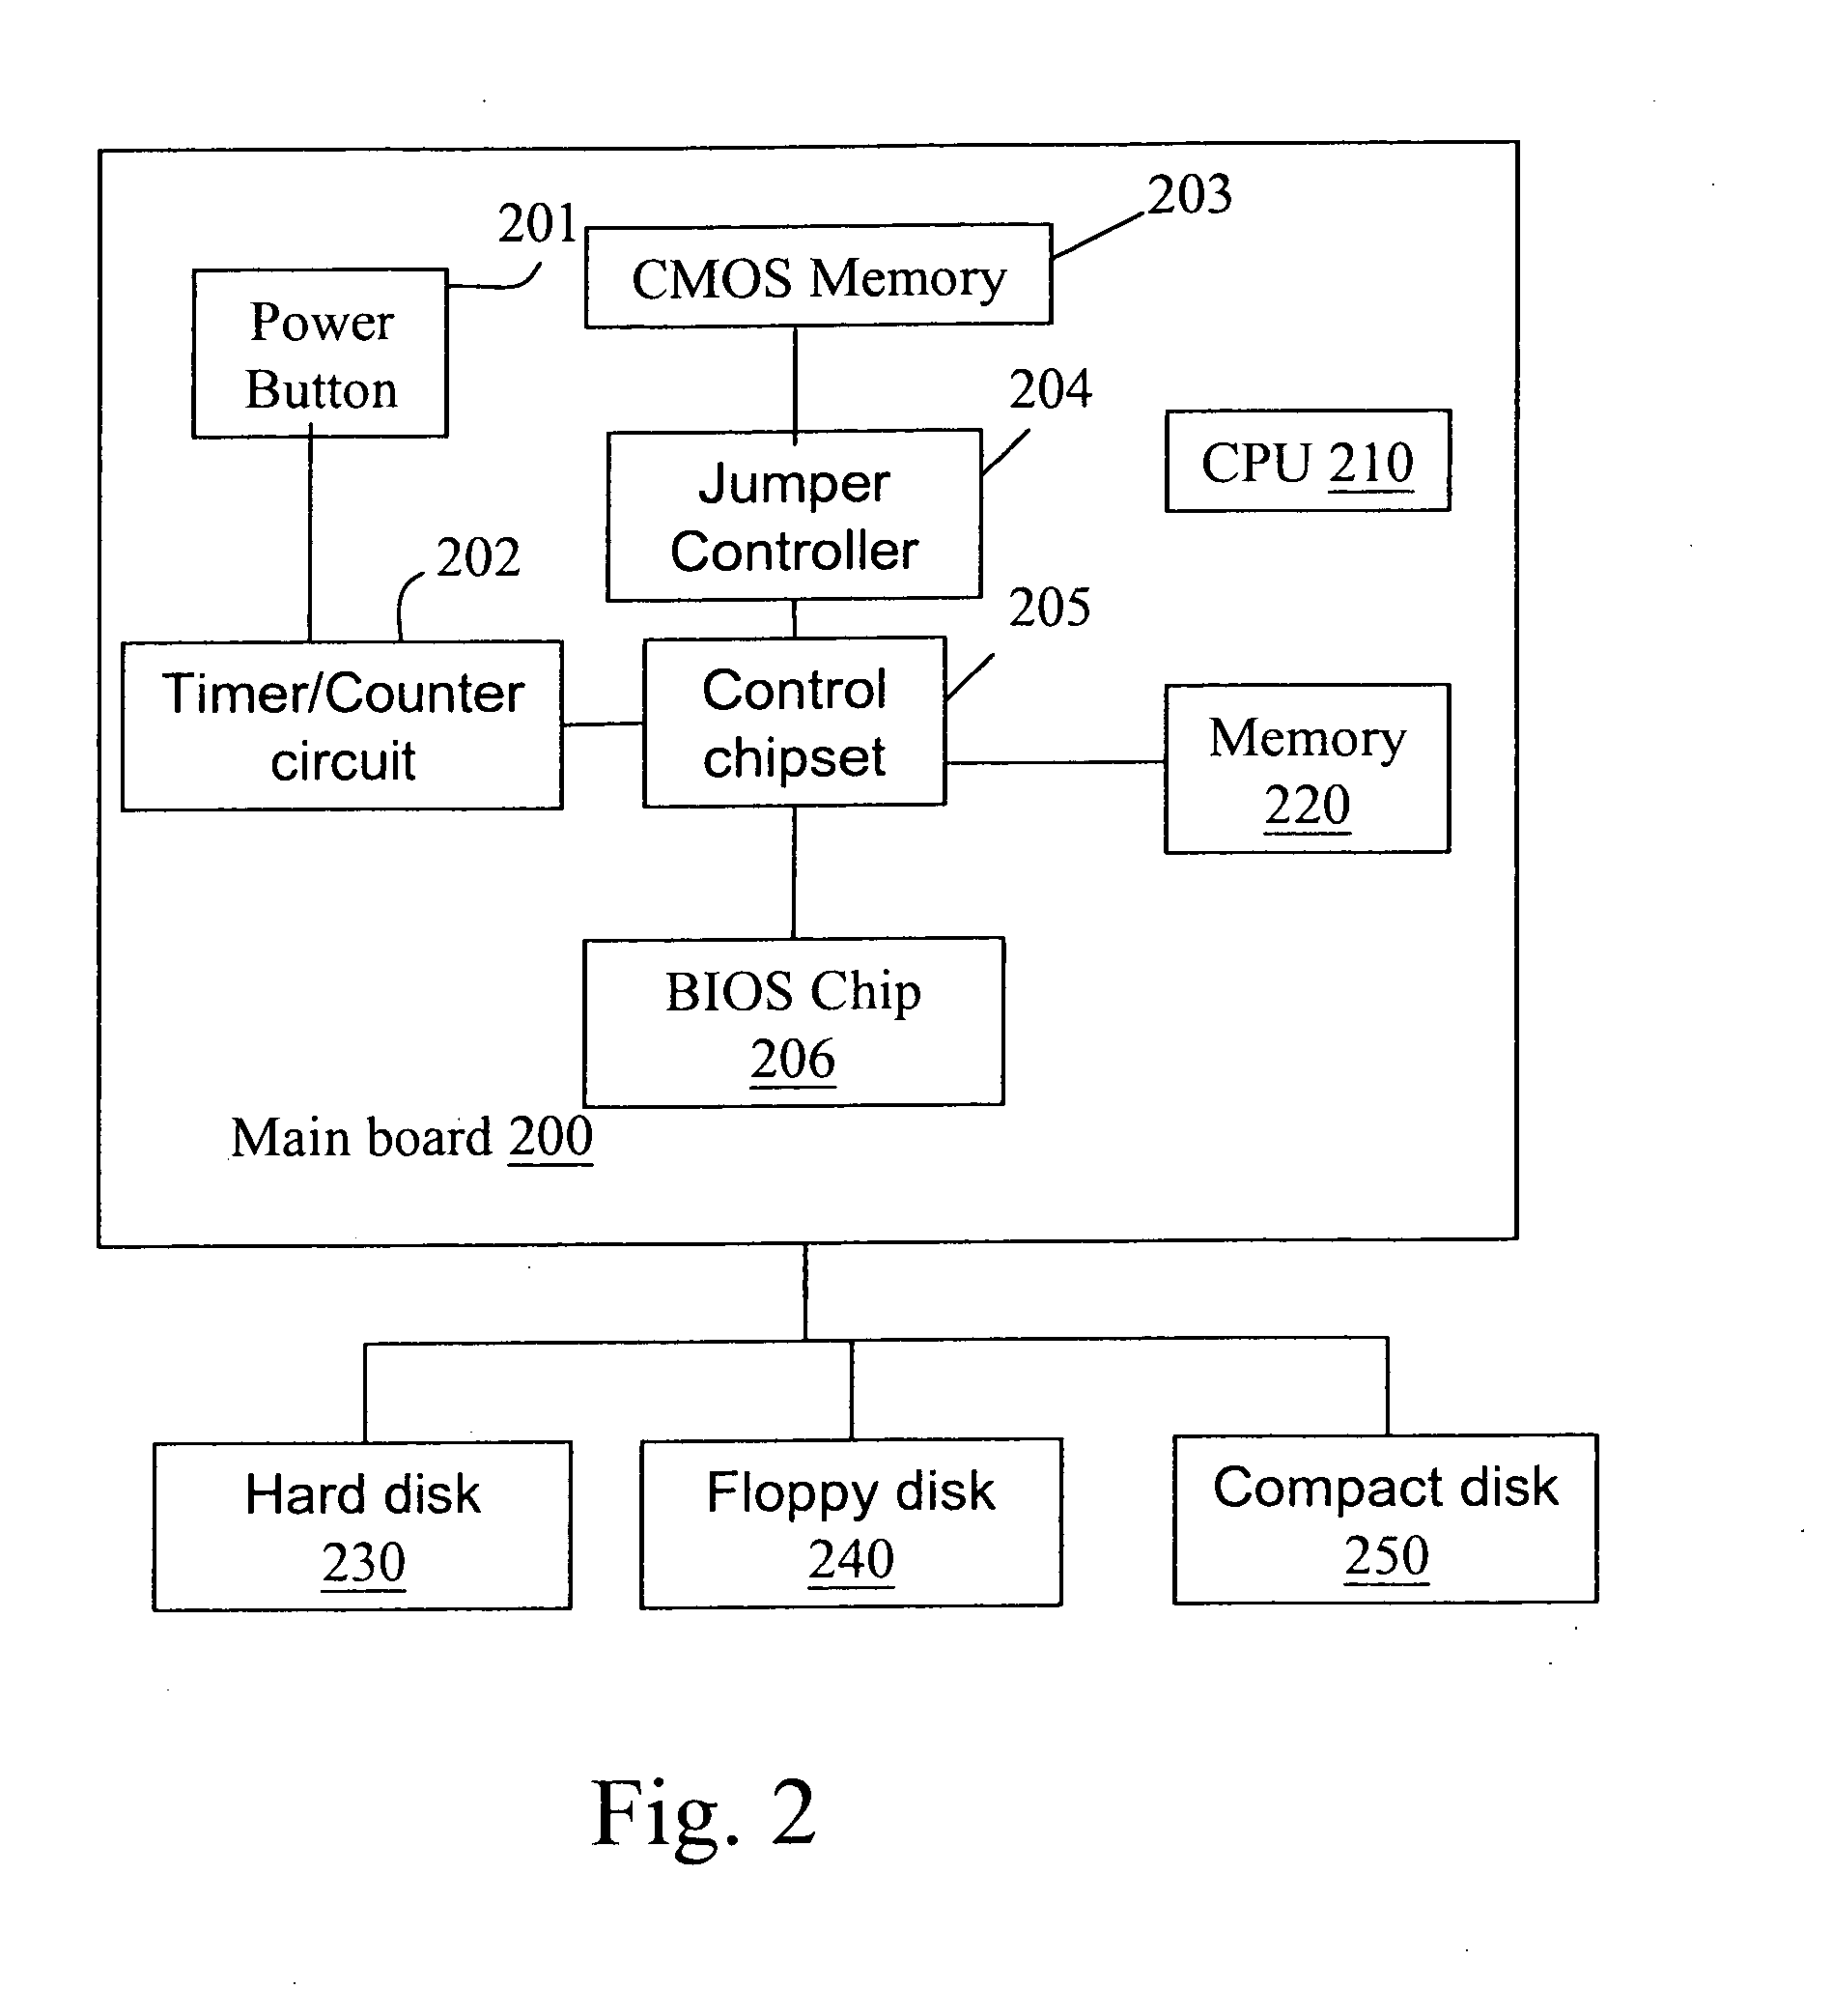 Method for automatically restoring system configuration with a single key